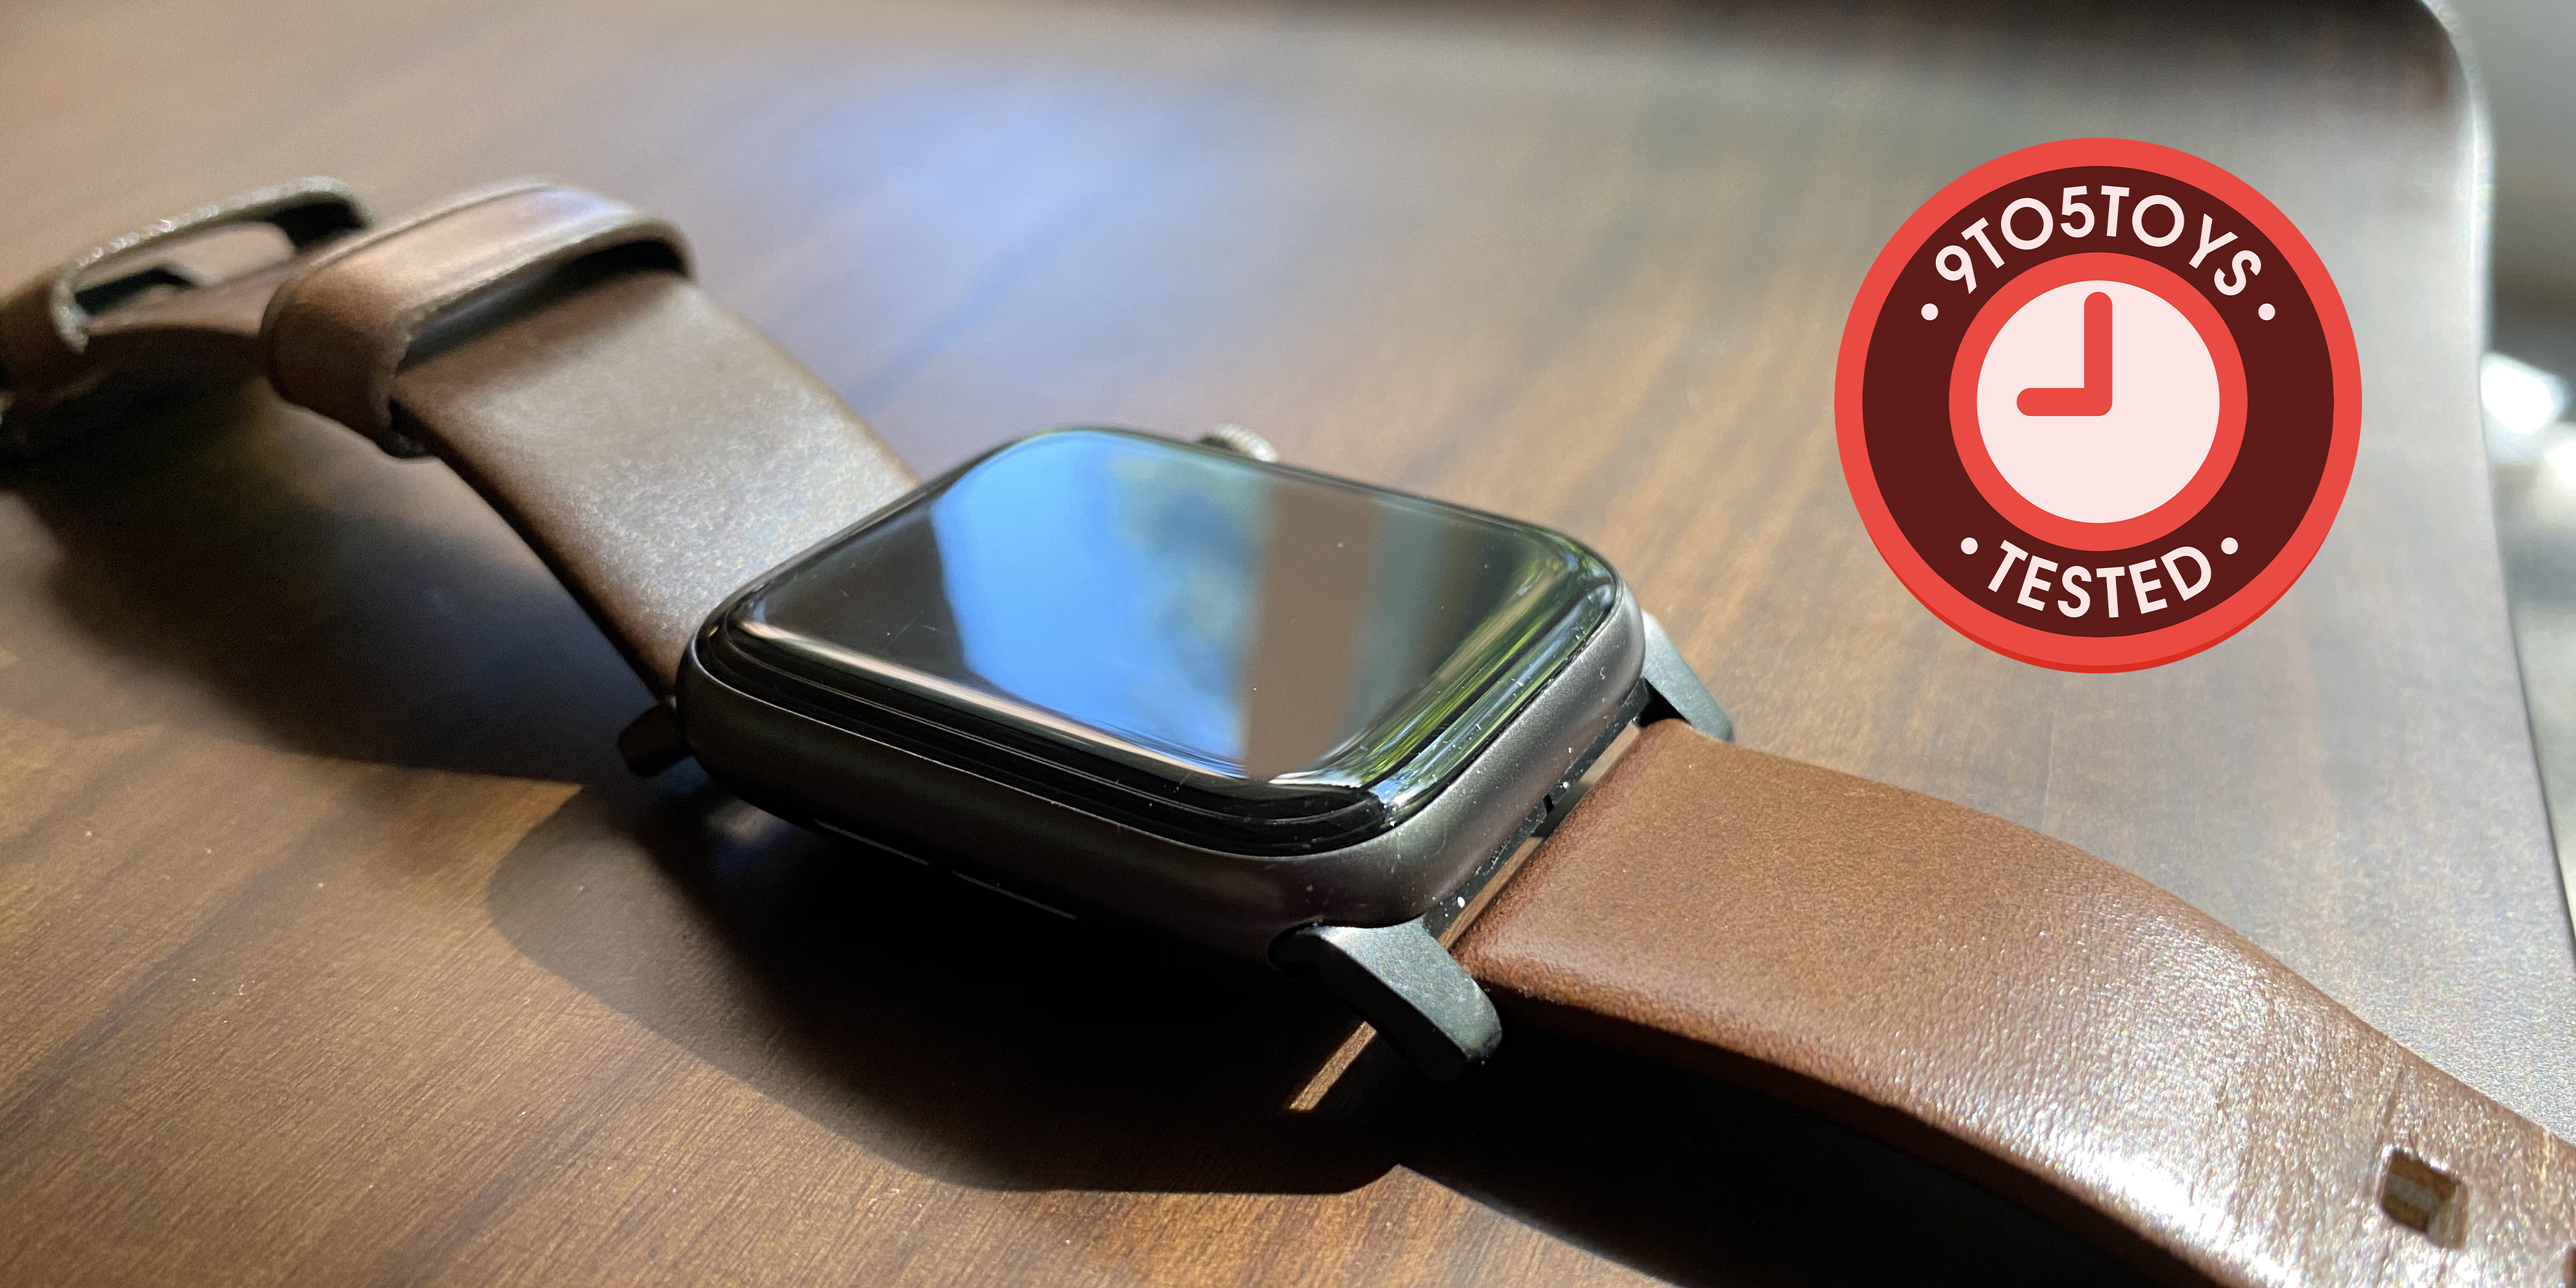 Nomad Modern Strap Review: Affordable Apple Watch band - 9to5Toys